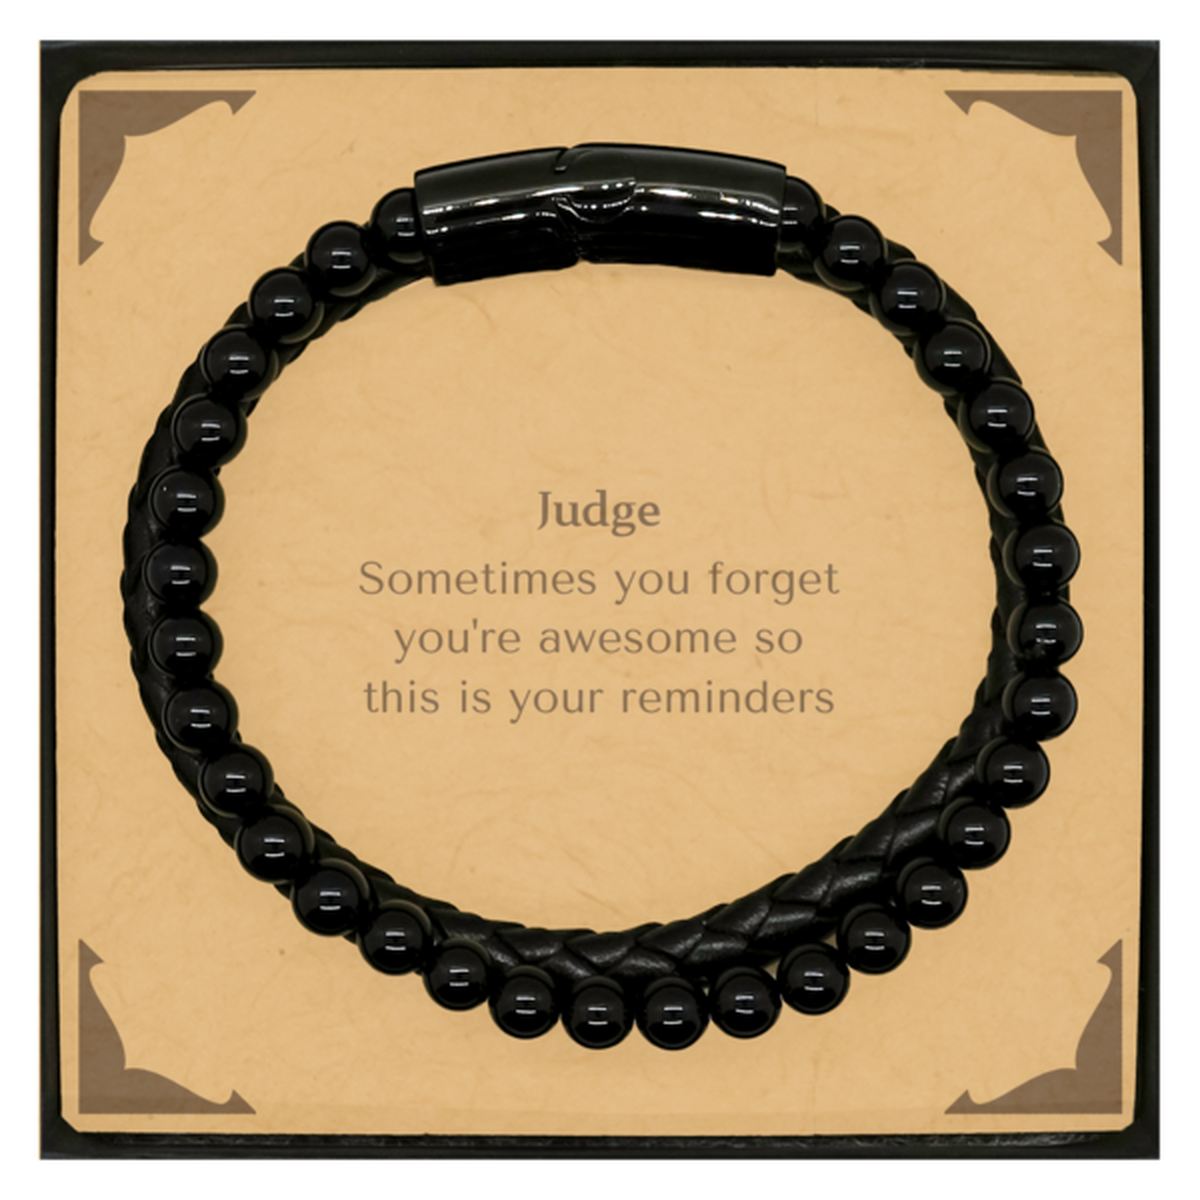 Sentimental Judge Stone Leather Bracelets, Judge Sometimes you forget you're awesome so this is your reminders, Graduation Christmas Birthday Gifts for Judge, Men, Women, Coworkers